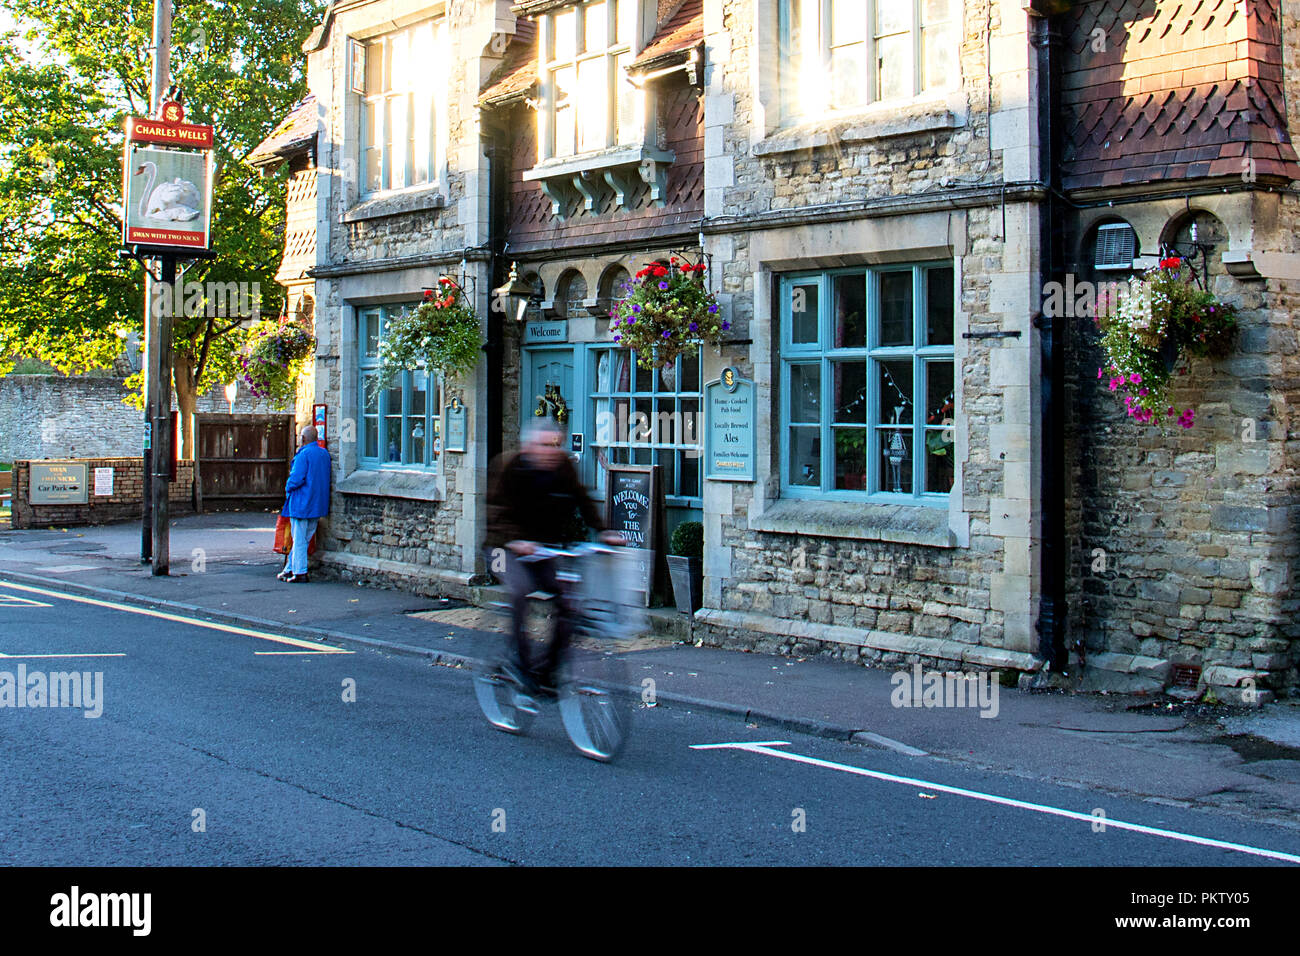 A cyclist passing an English country pub in the village of Sharnbrook, Bedfordshire, England Stock Photo